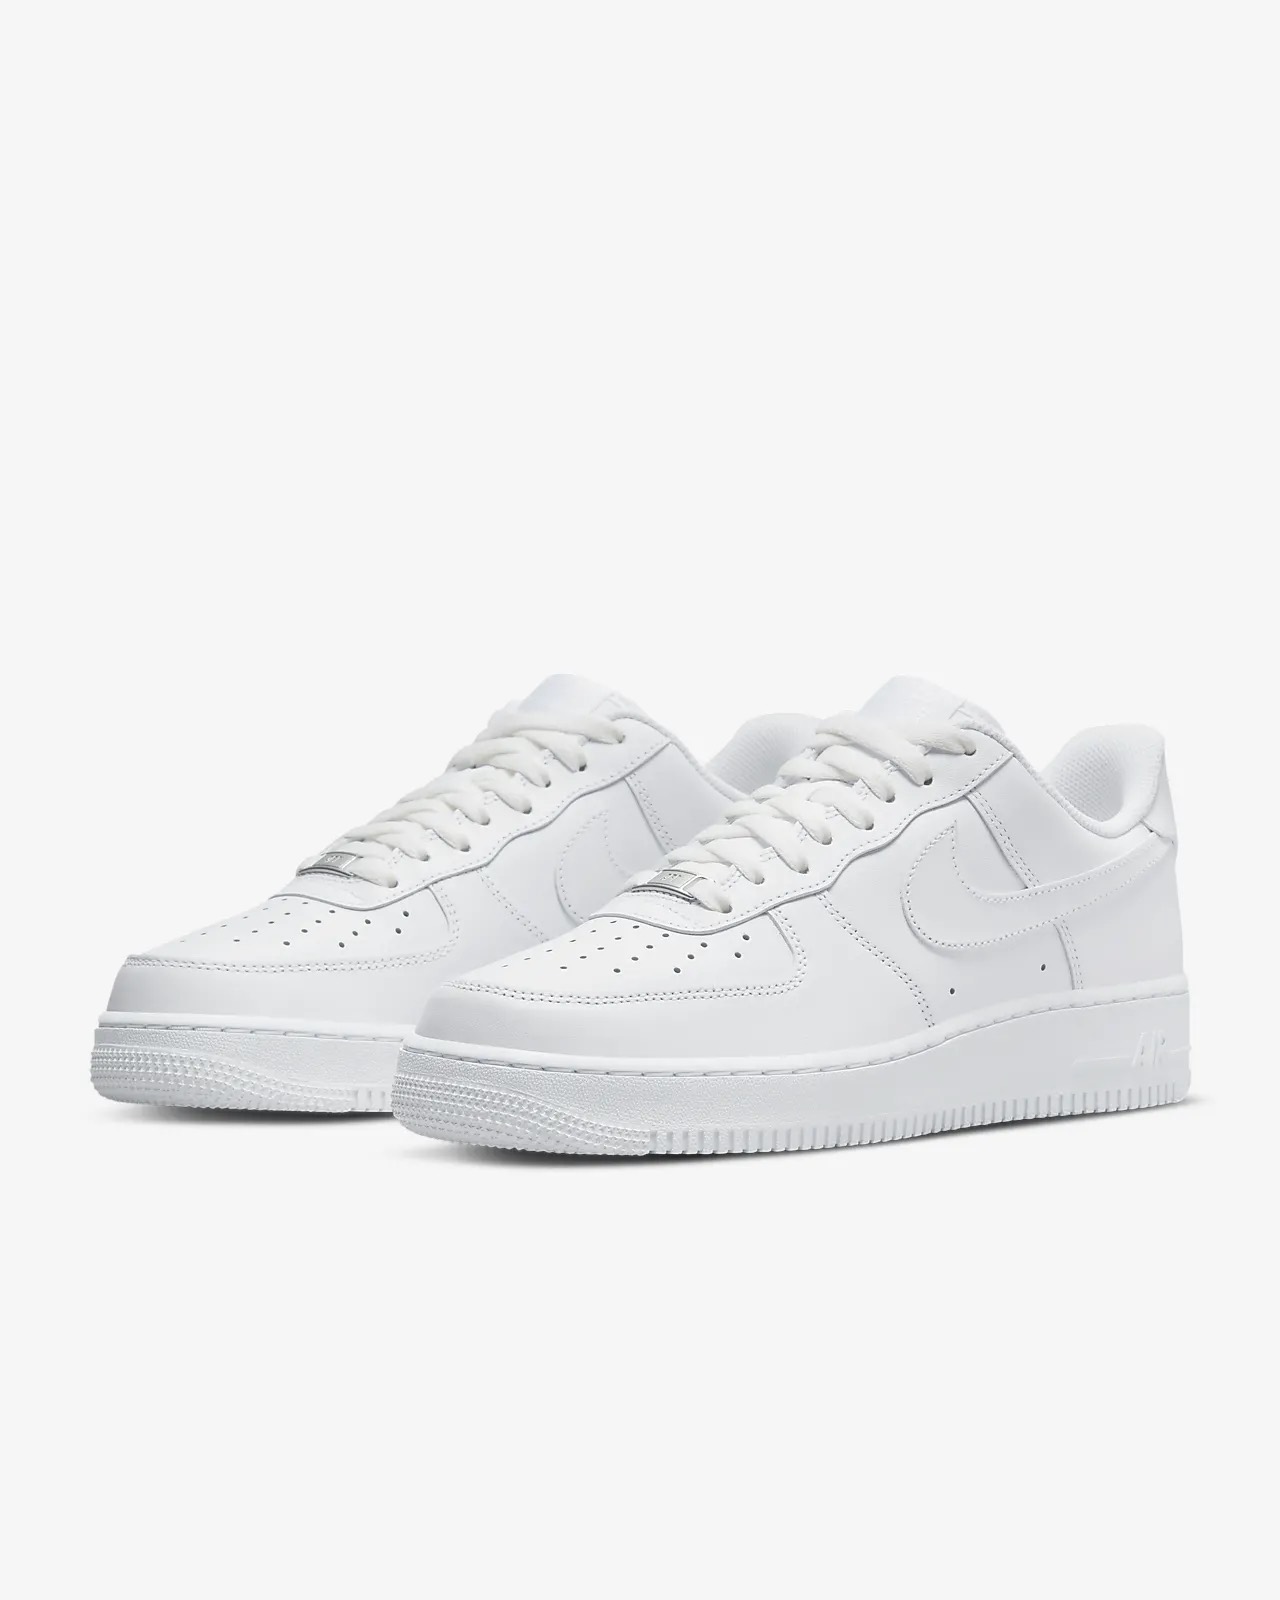 bike air force 1, one of the best summer sneakers